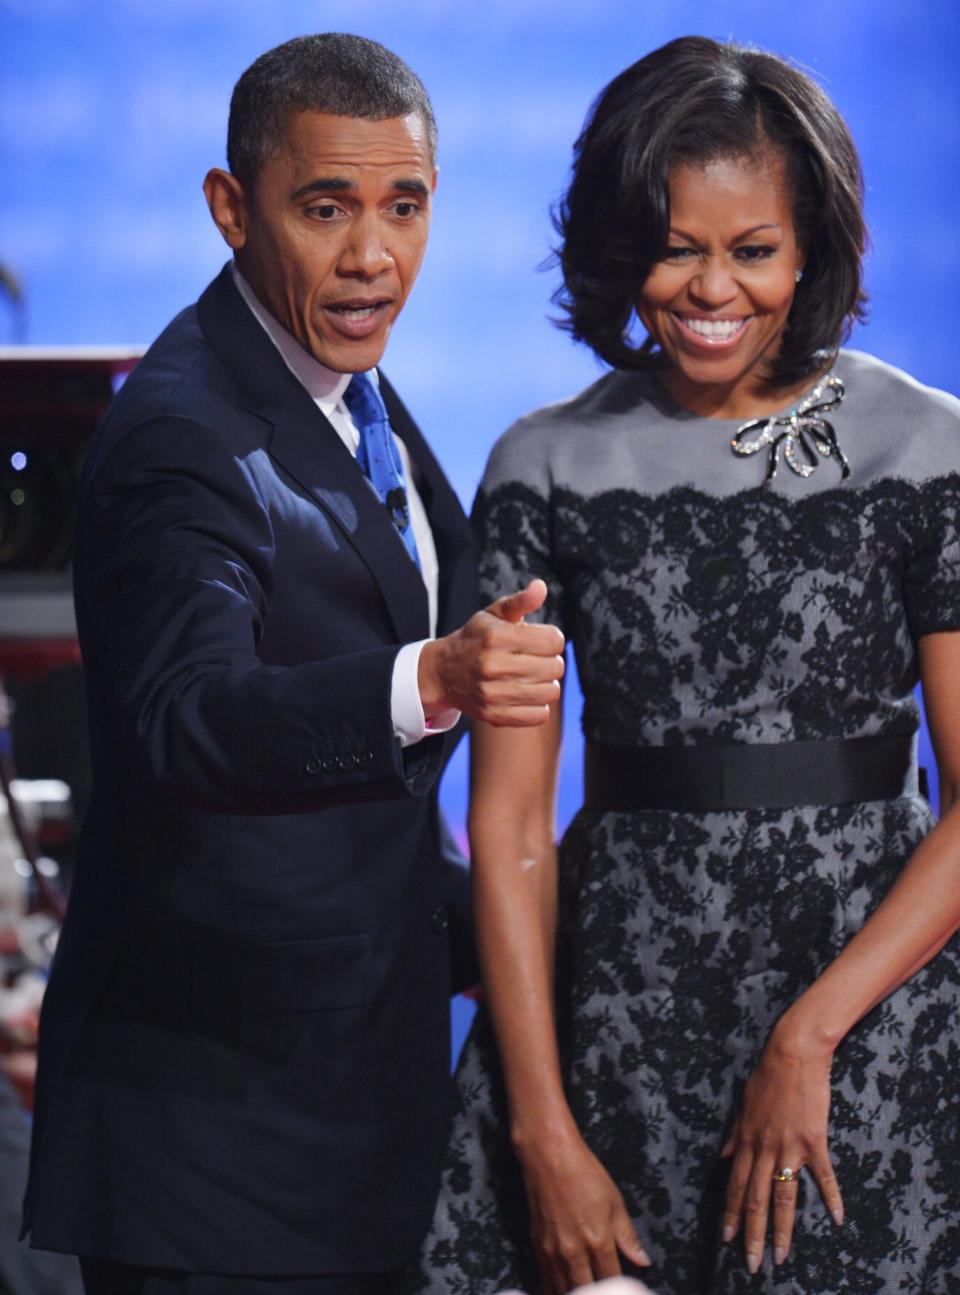 Barack and Michelle Obama at the third presidential debate in 2012.